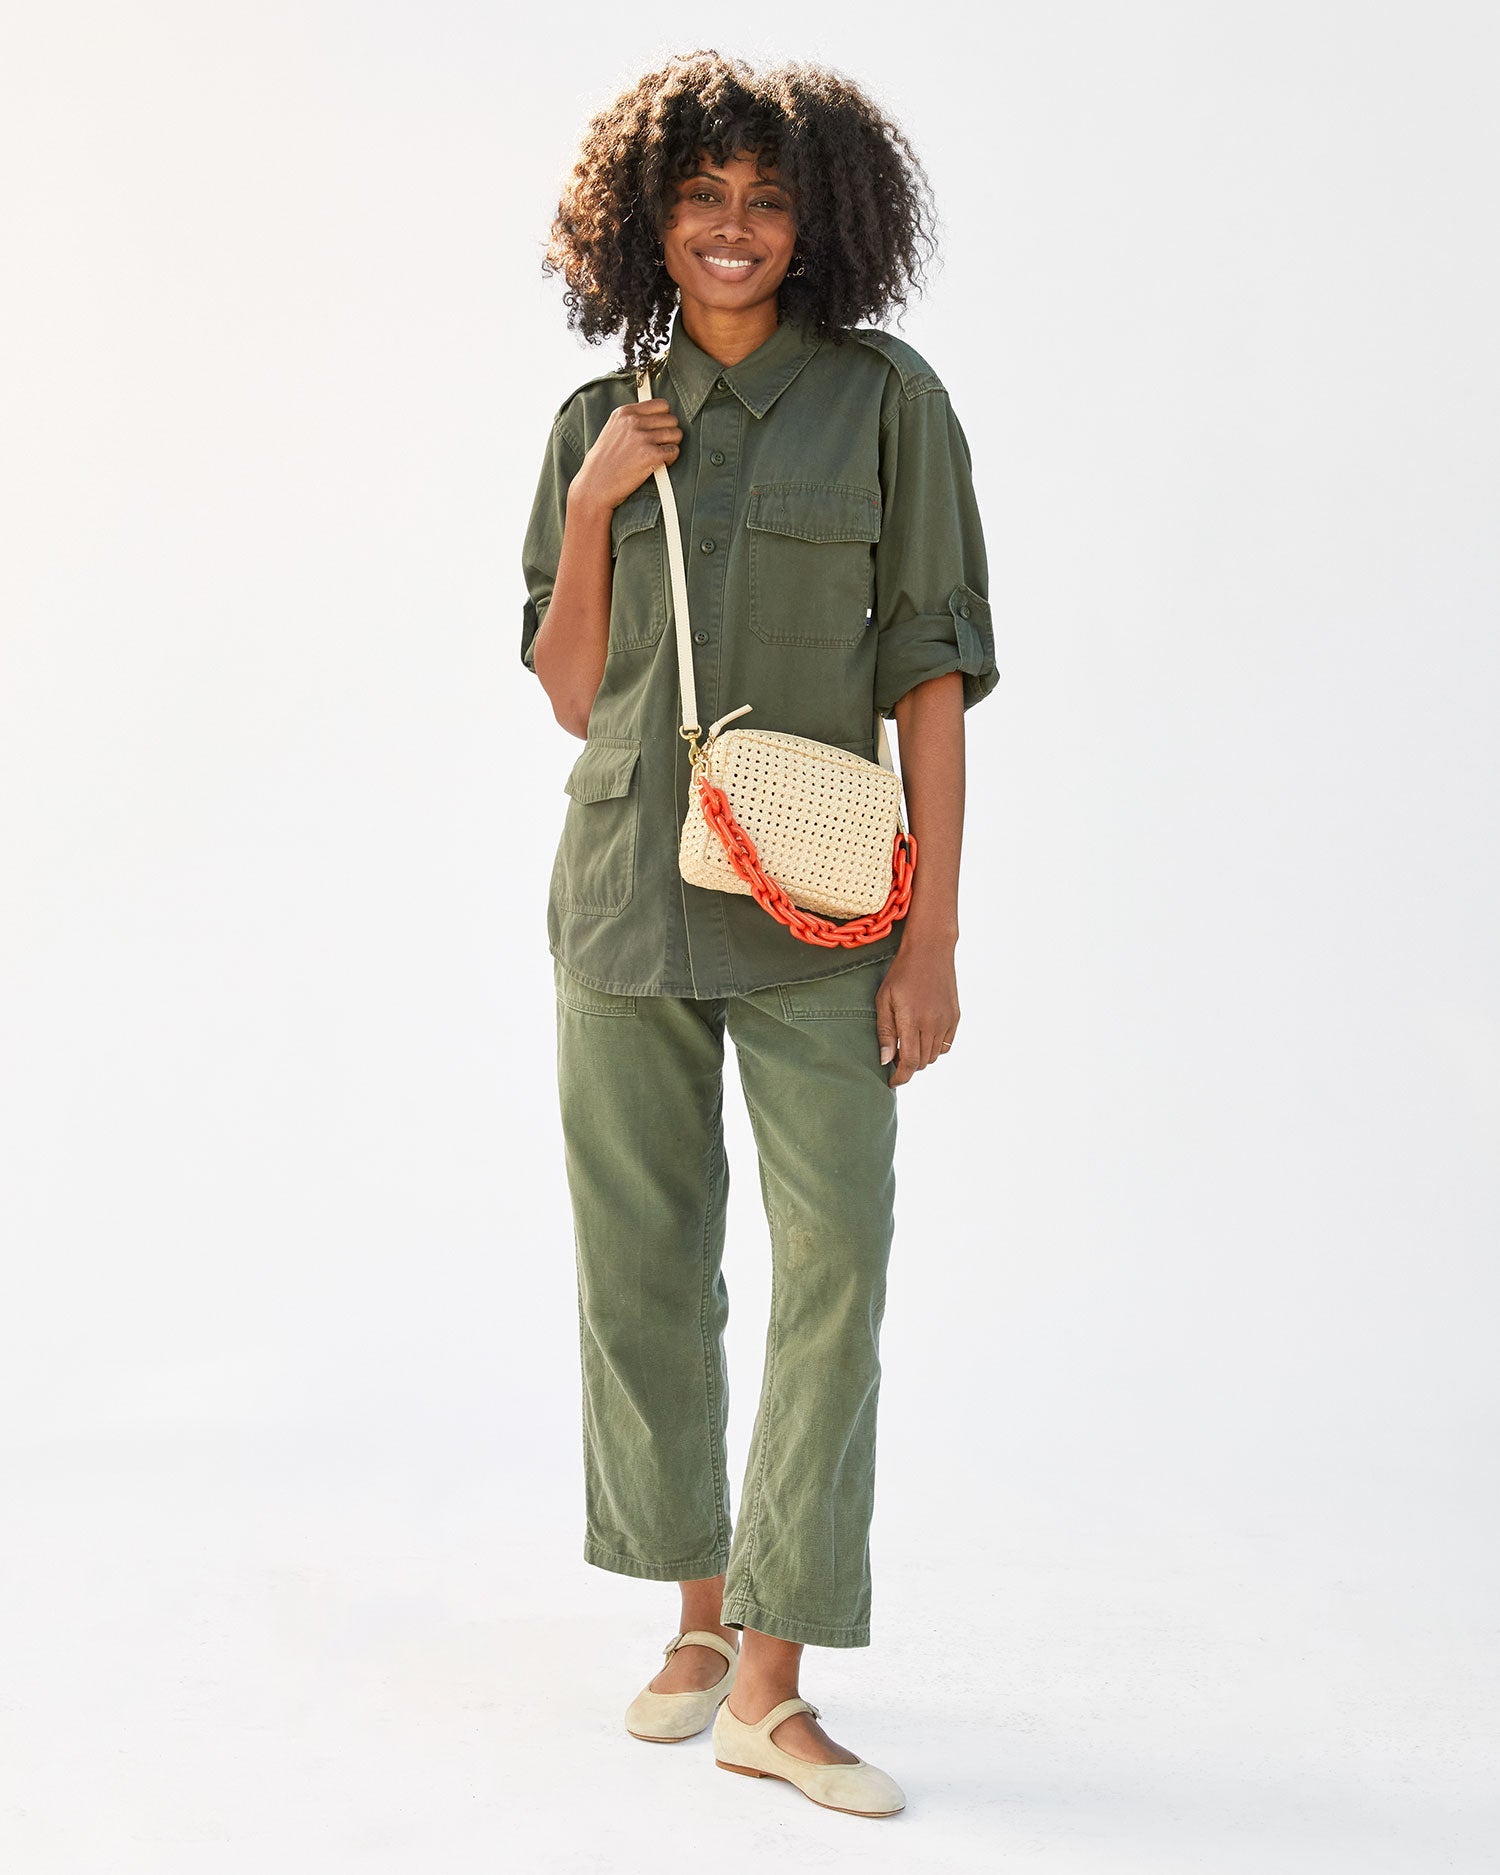 mecca in an army jumpsuit wearing the Cream Rattan Midi Sac with the neon orange short strap